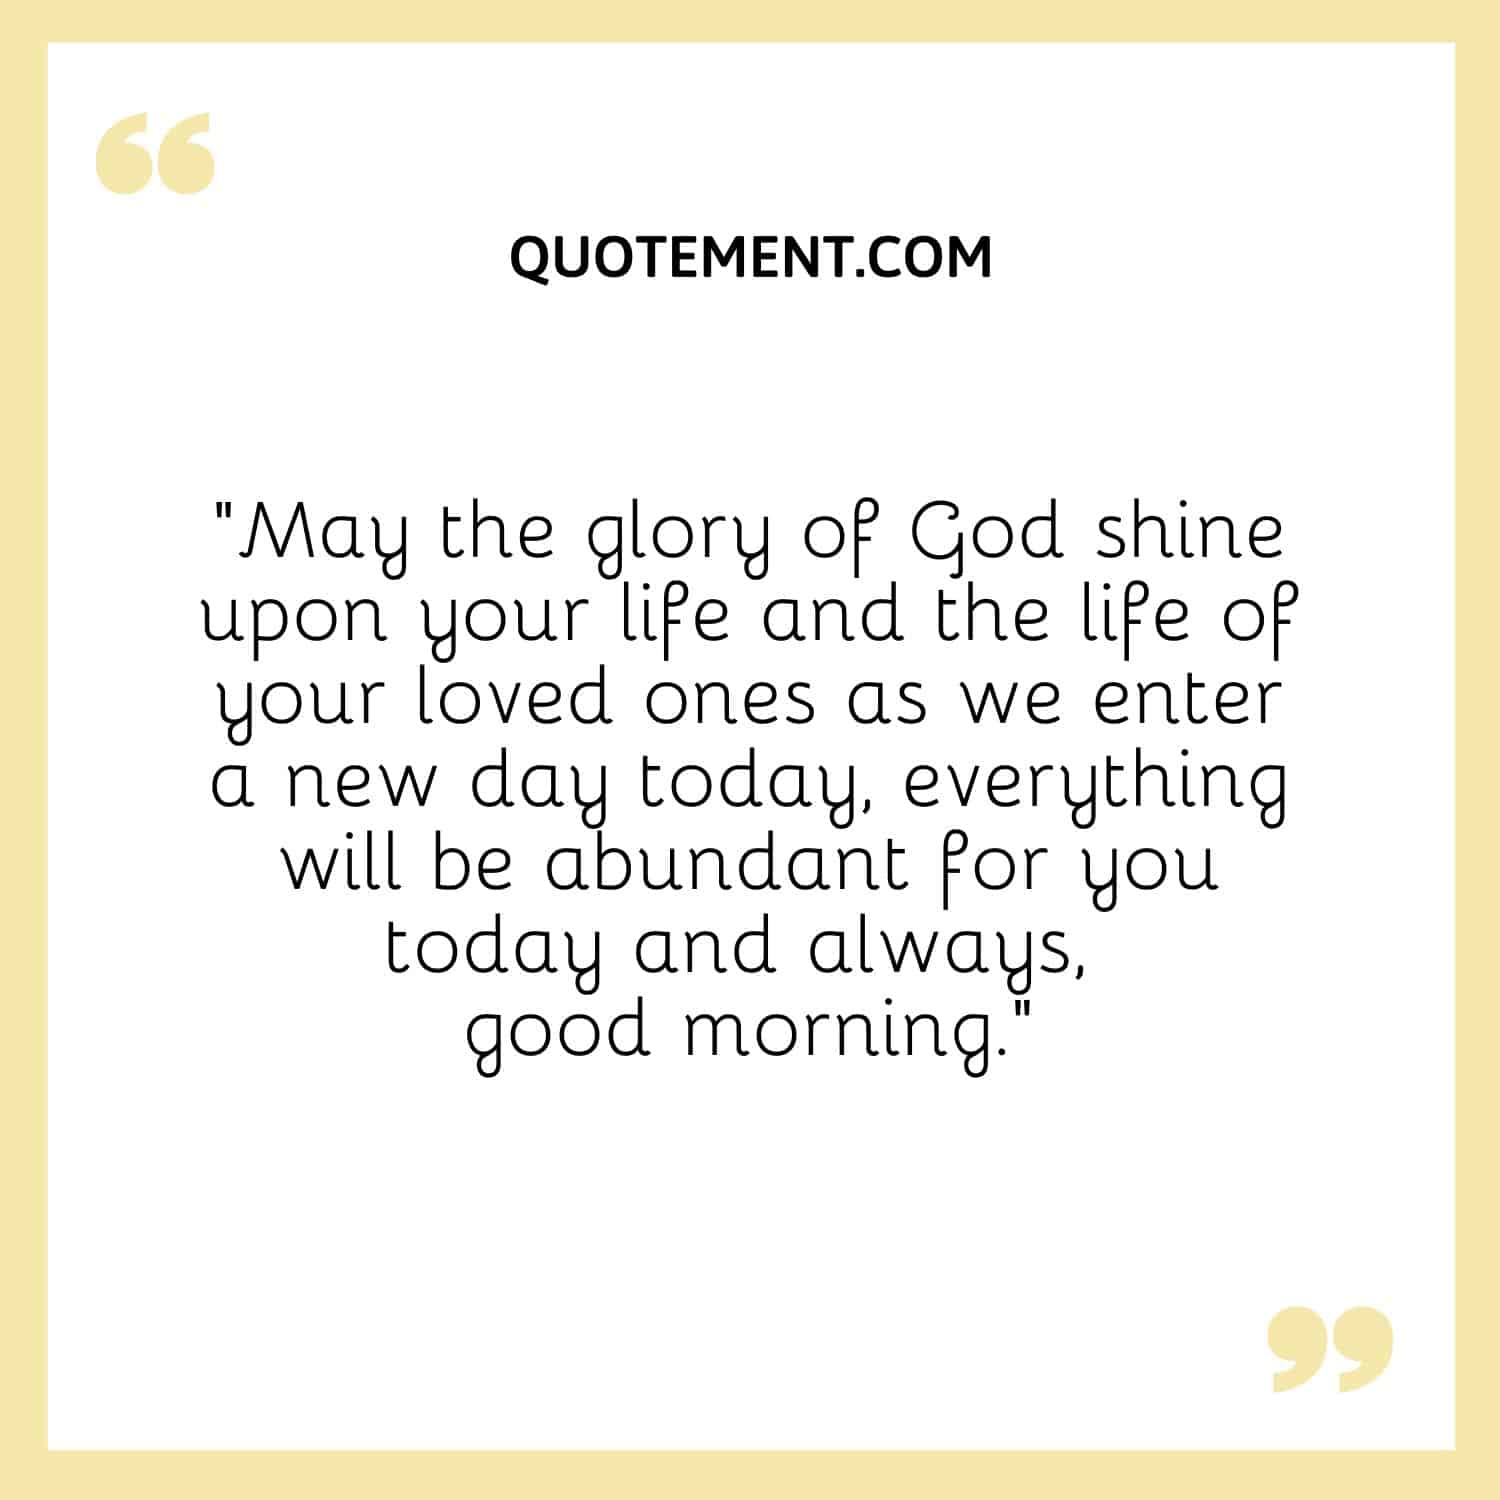 May the glory of God shine upon your life and the life of your loved ones as we enter a new day today